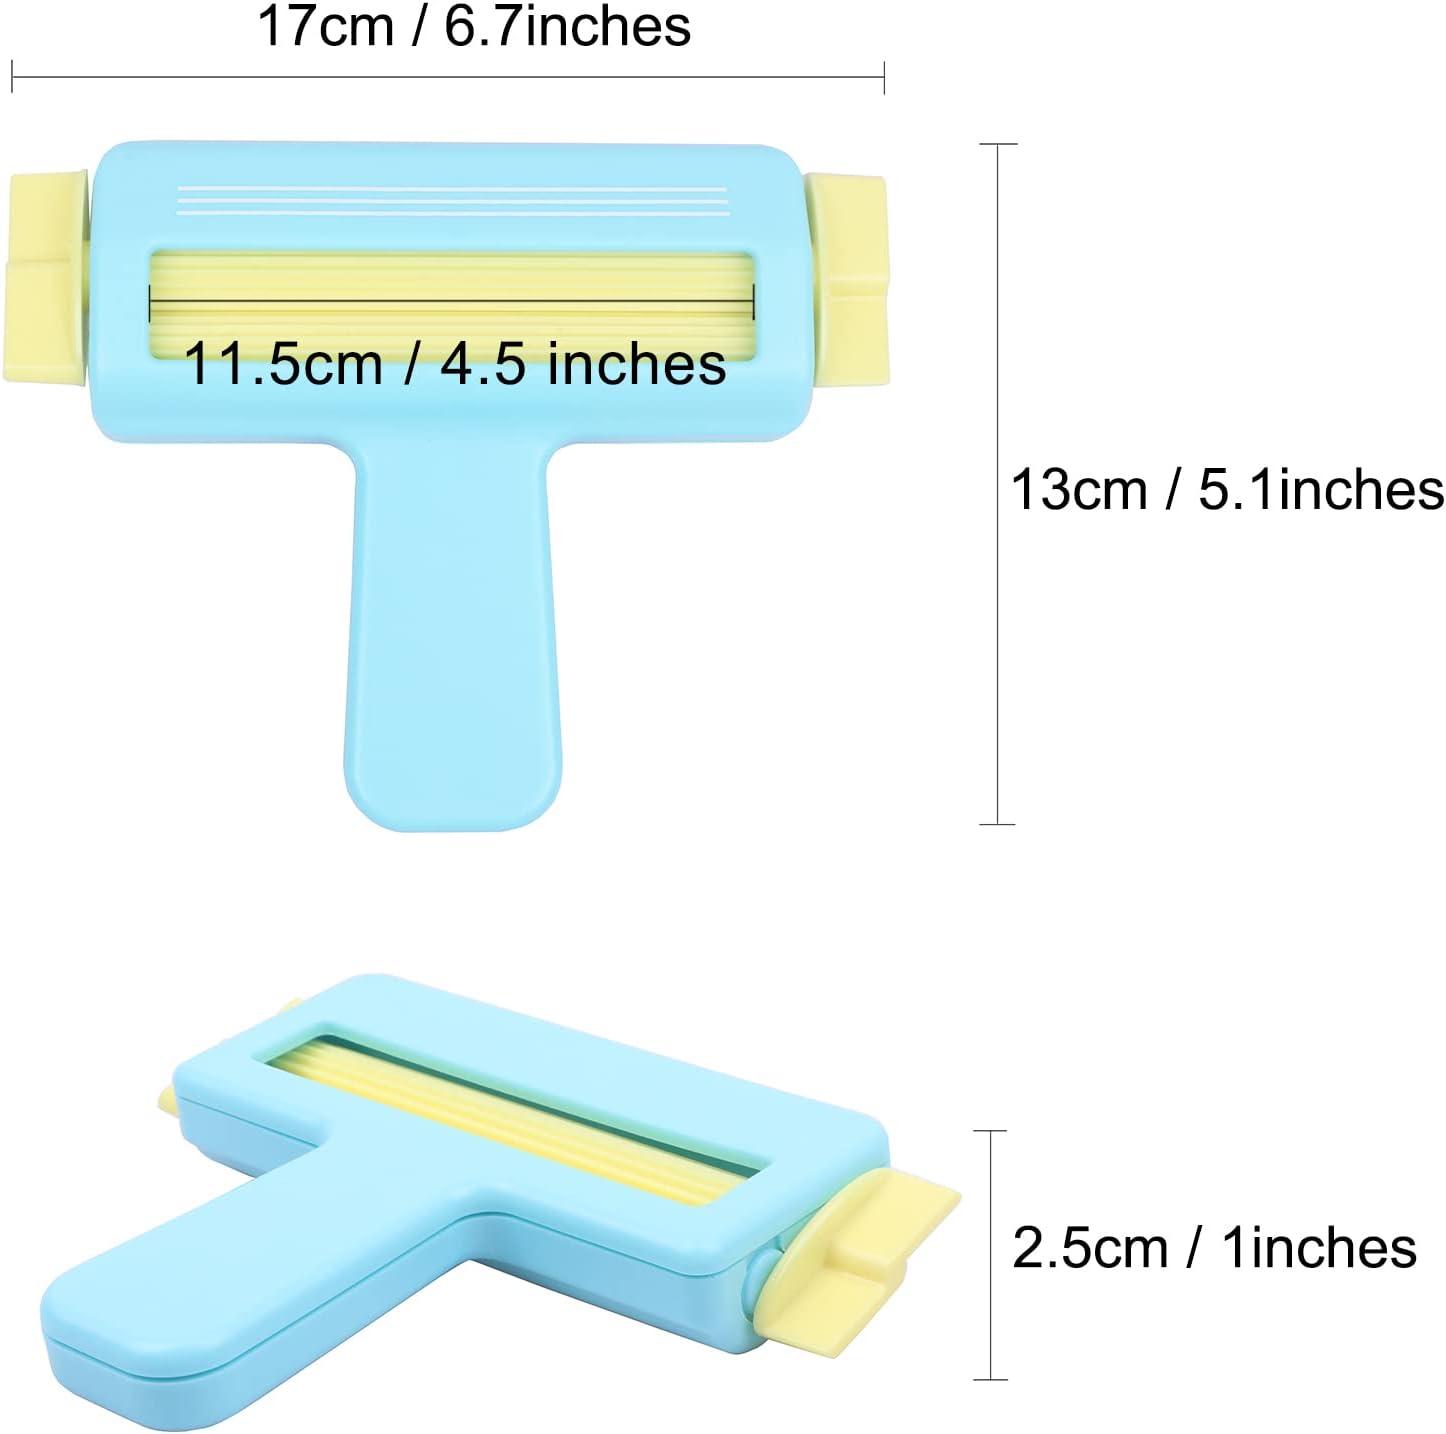 1 Pcs Paper Crimper Crimping Tool,Paper Slip Wave Shaper Making Tool Paper Quilling Papercraft Origami Craft DIY Quilling Supplies Handmade Decor by H